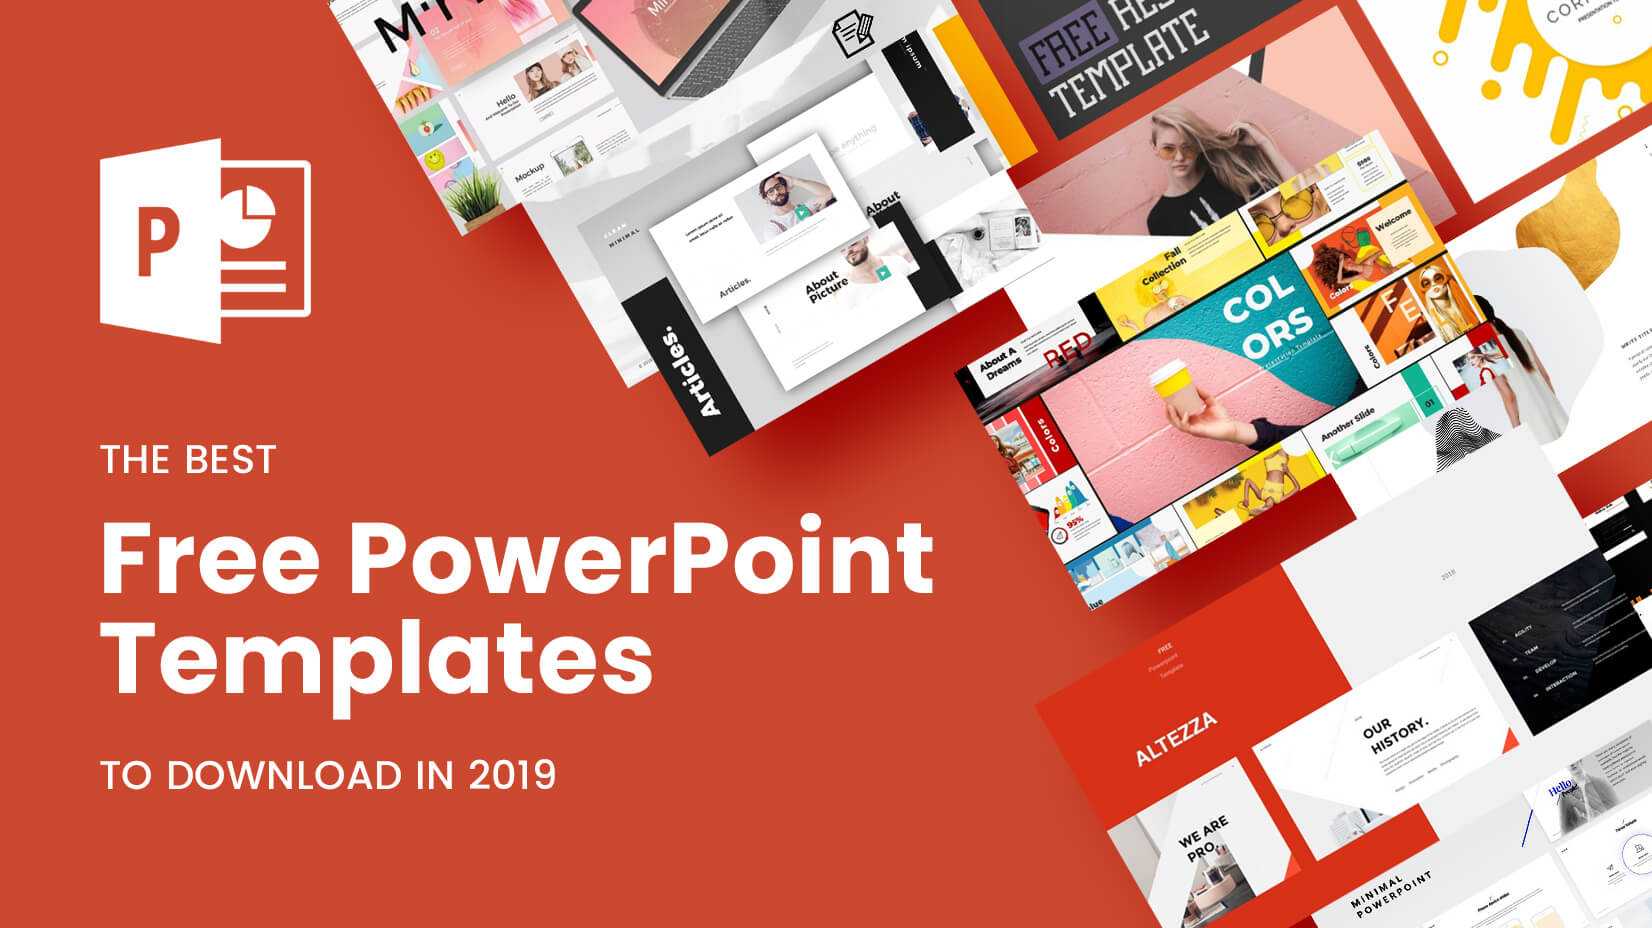 The Best Free Powerpoint Templates To Download In 2019 Inside Virus Powerpoint Template Free Download